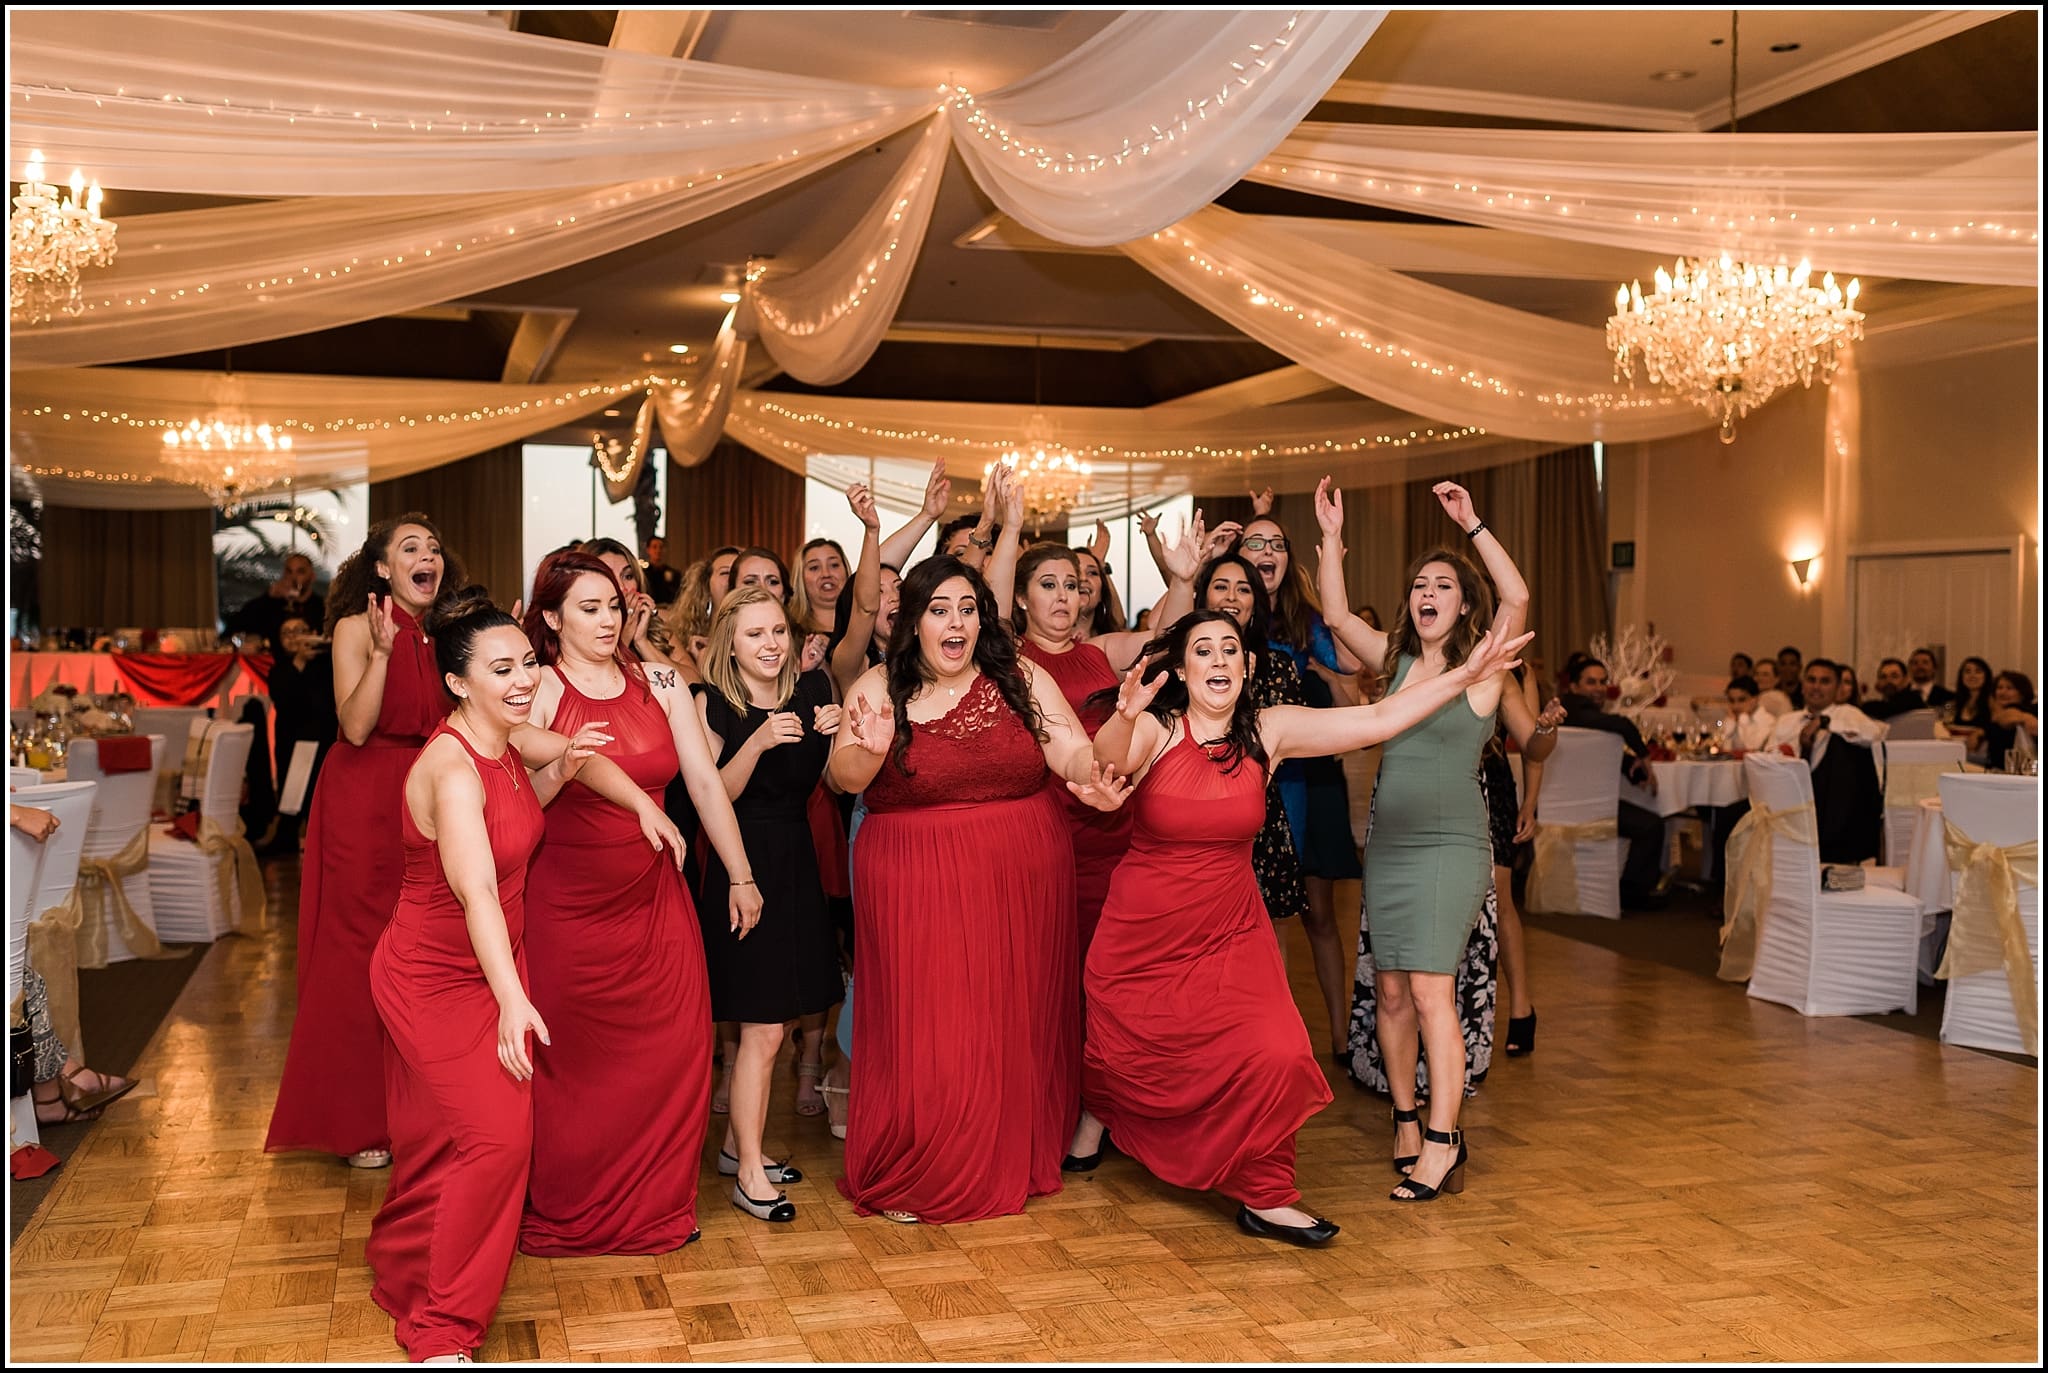  favorite wedding images 2016, wedding photos from 2016, our favorite wedding photos, best bouquet toss photos, wedding reception outtakes